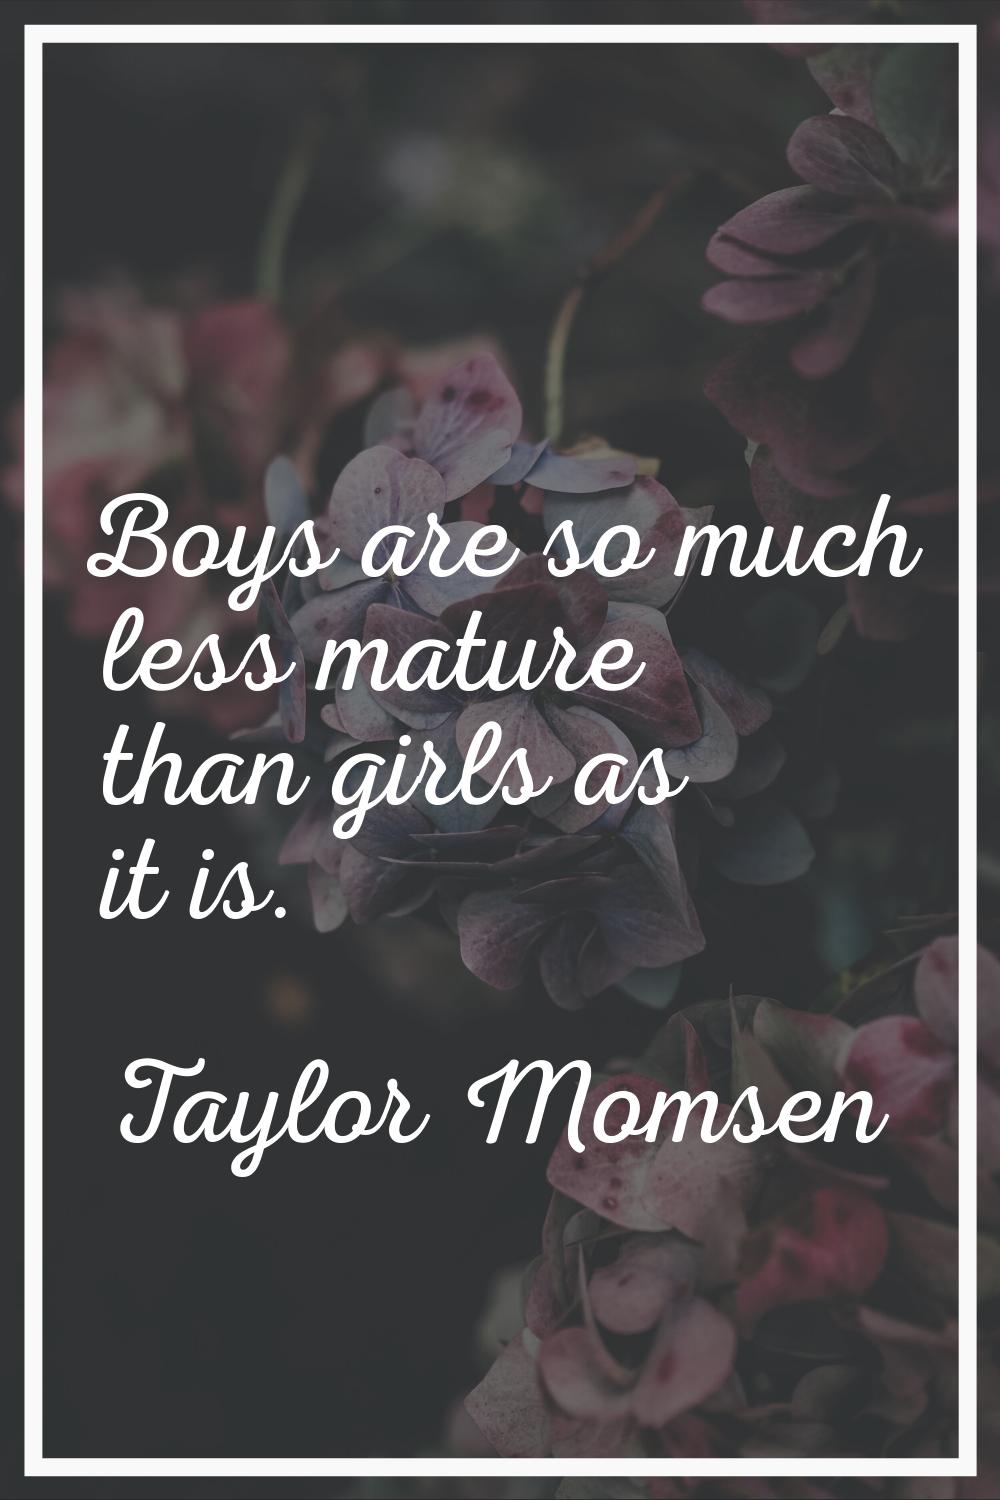 Boys are so much less mature than girls as it is.